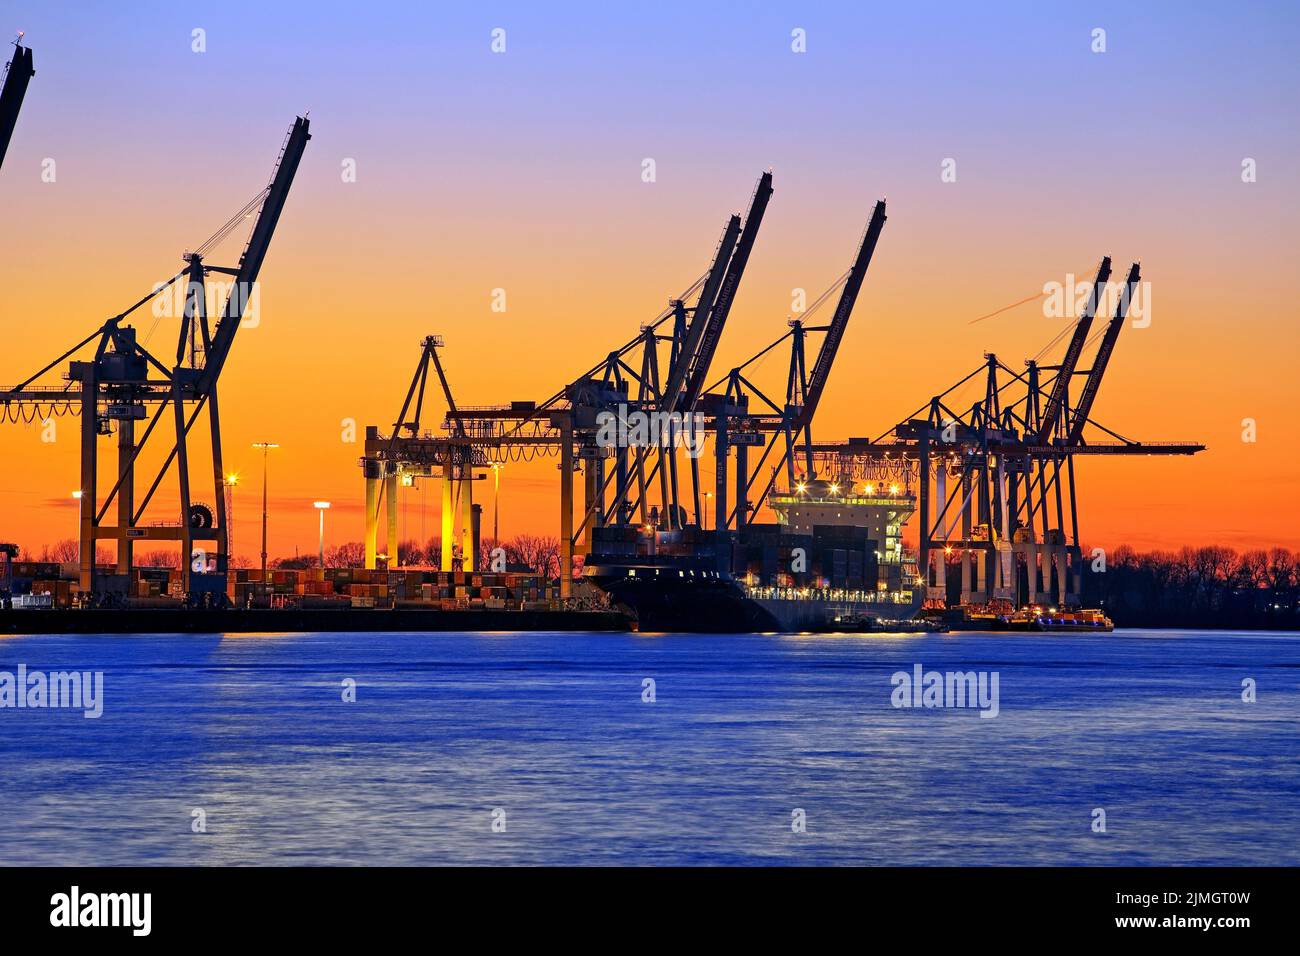 Loading cranes at the Burchardkai container terminal at sunset, Port of Hamburg, Germany, Europe Stock Photo